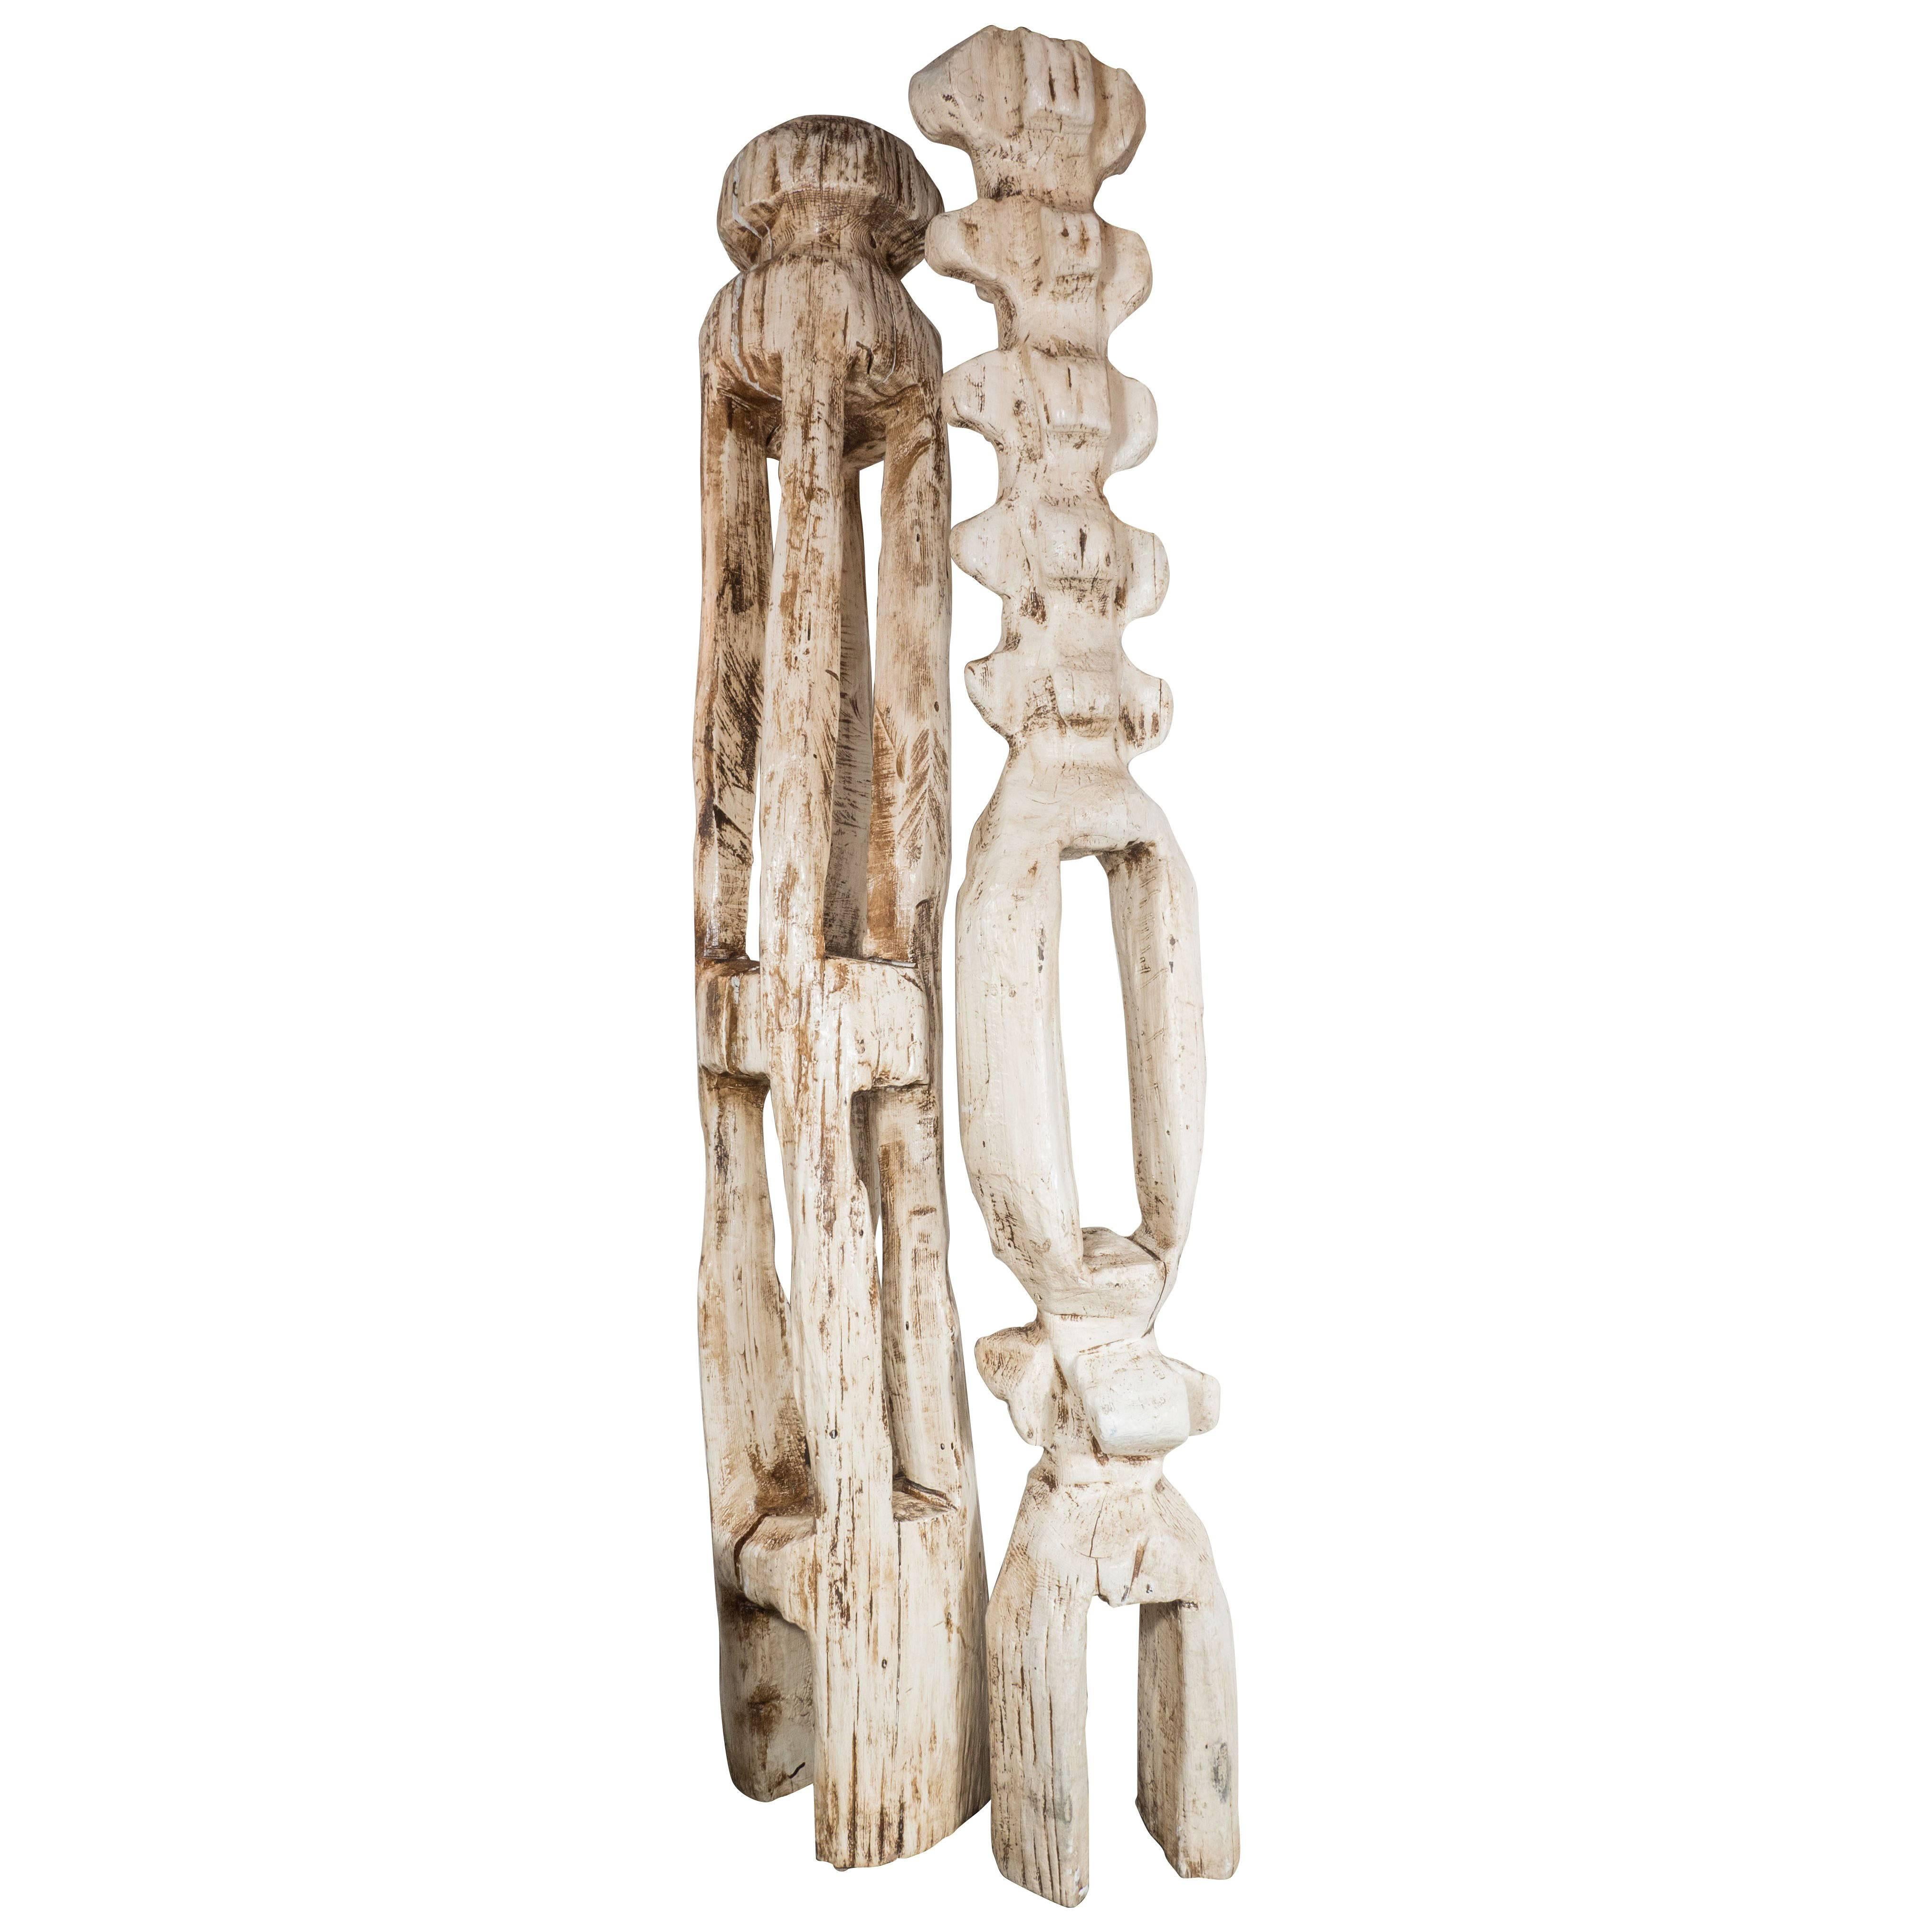 Monumental Pair of White Washed Hand Organic Sculpted Totems by Espen Eiborg